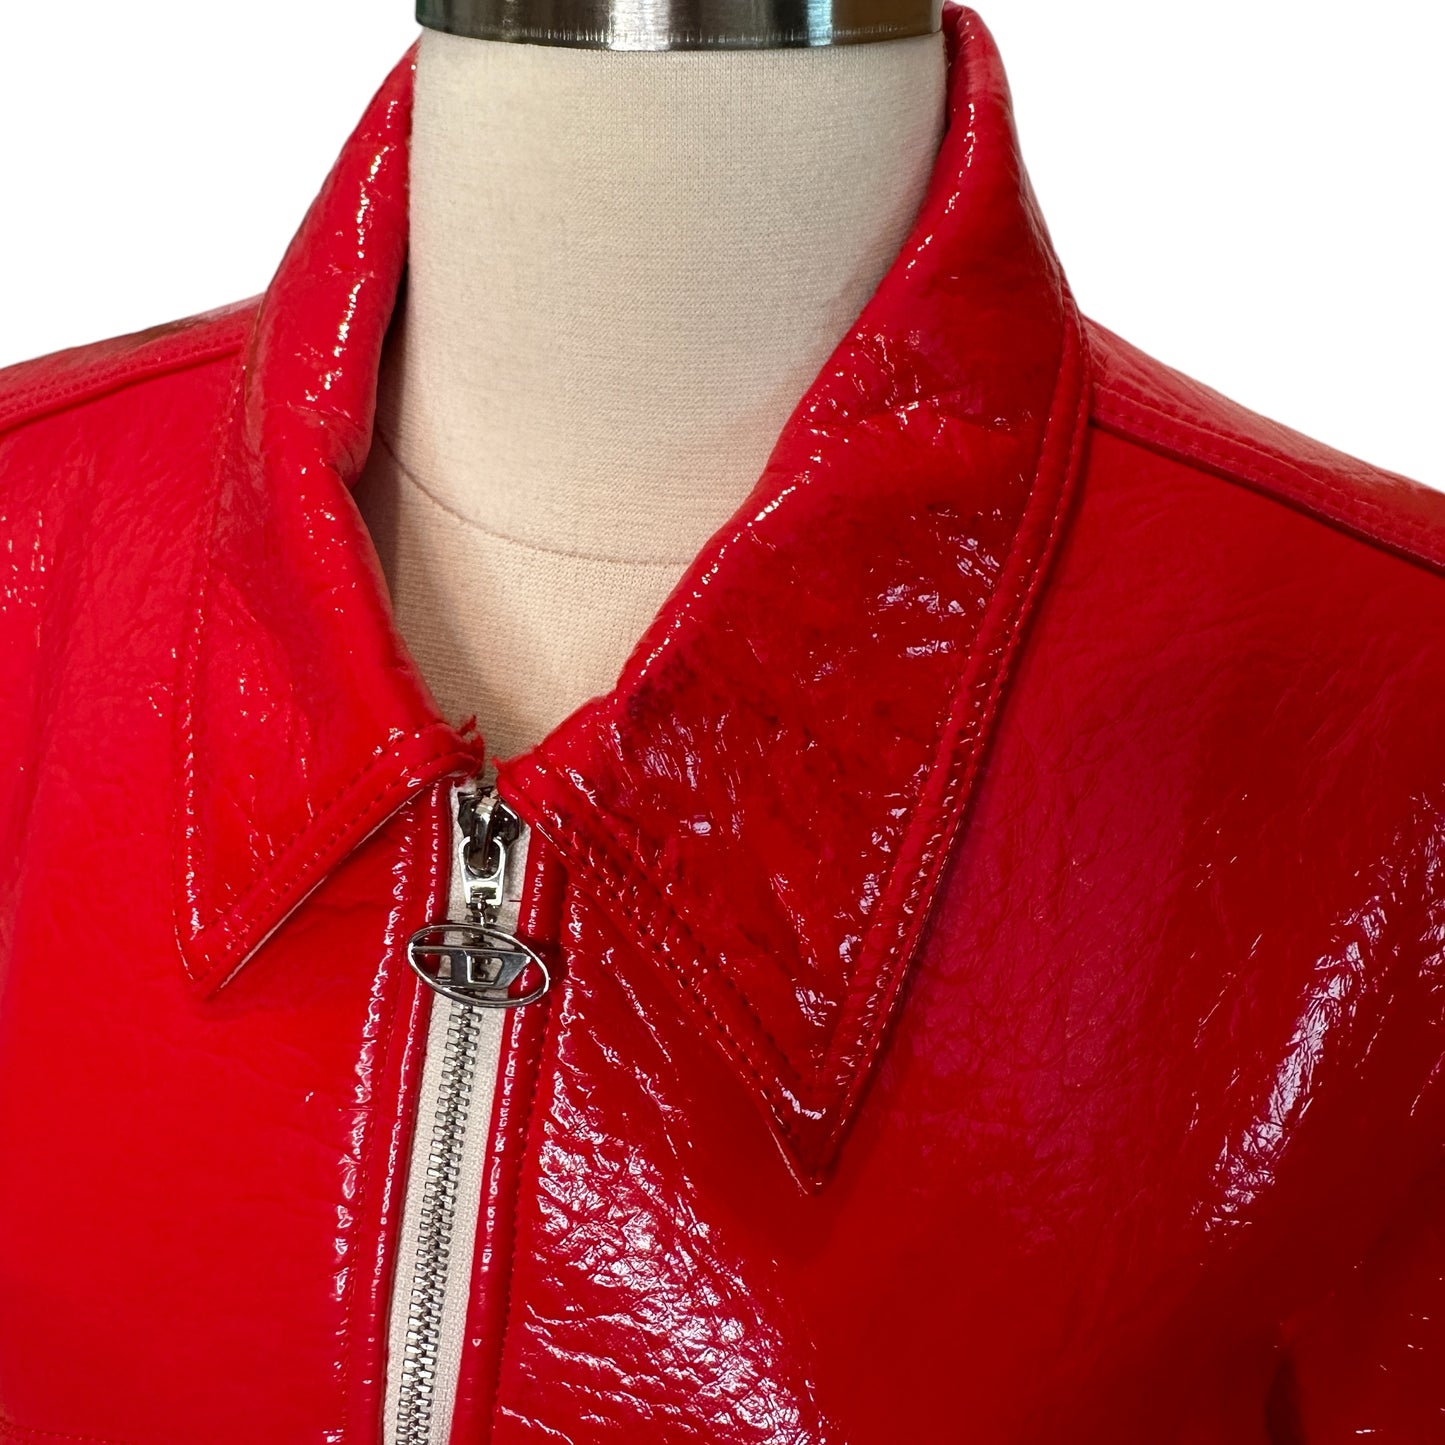 Red Patent Bomber Jacket - XL